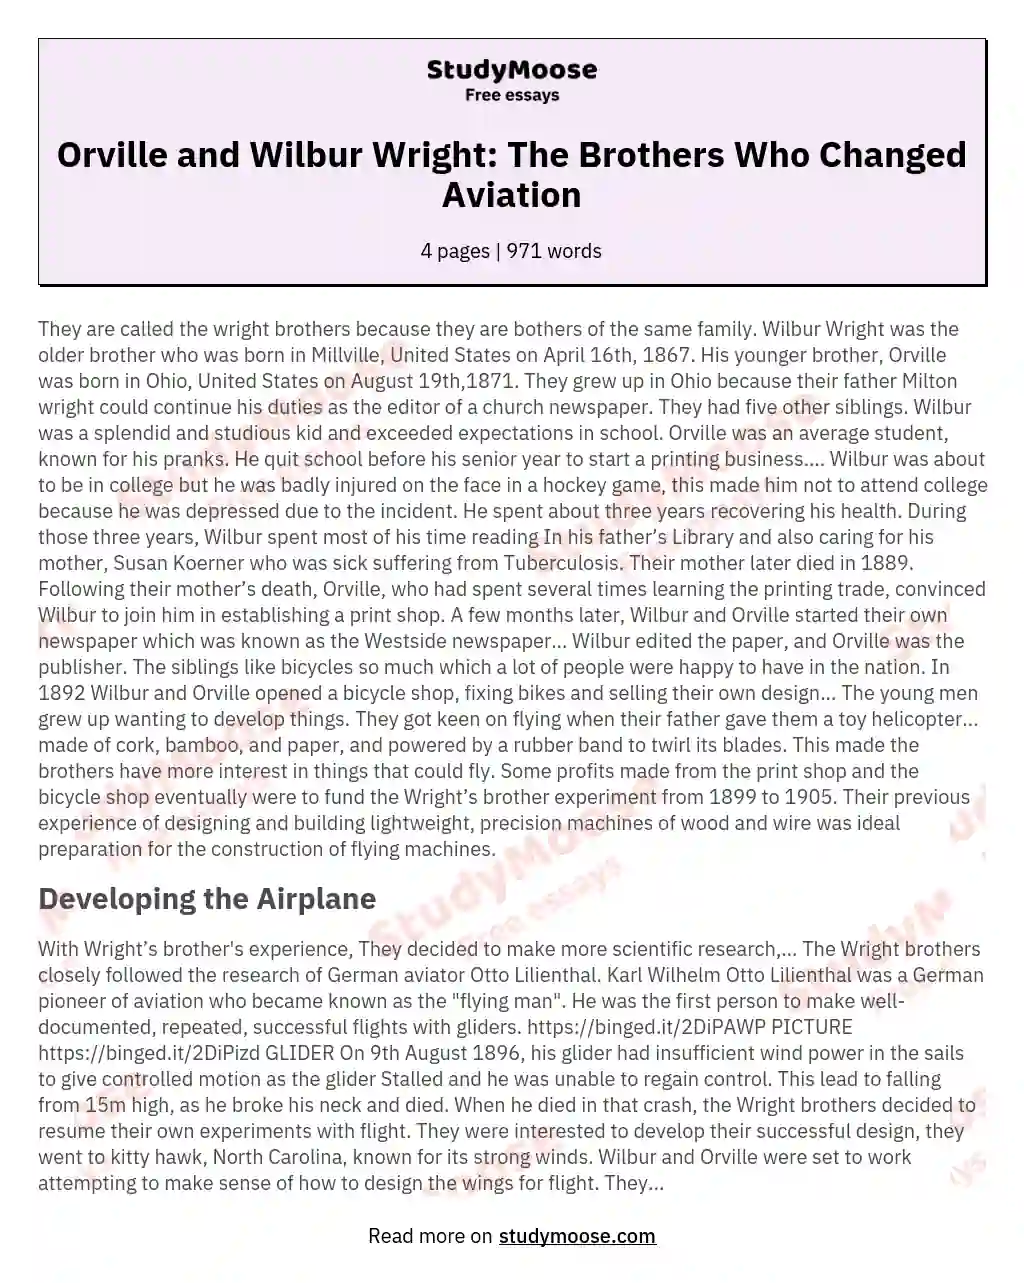 Orville and Wilbur Wright: The Brothers Who Changed Aviation essay